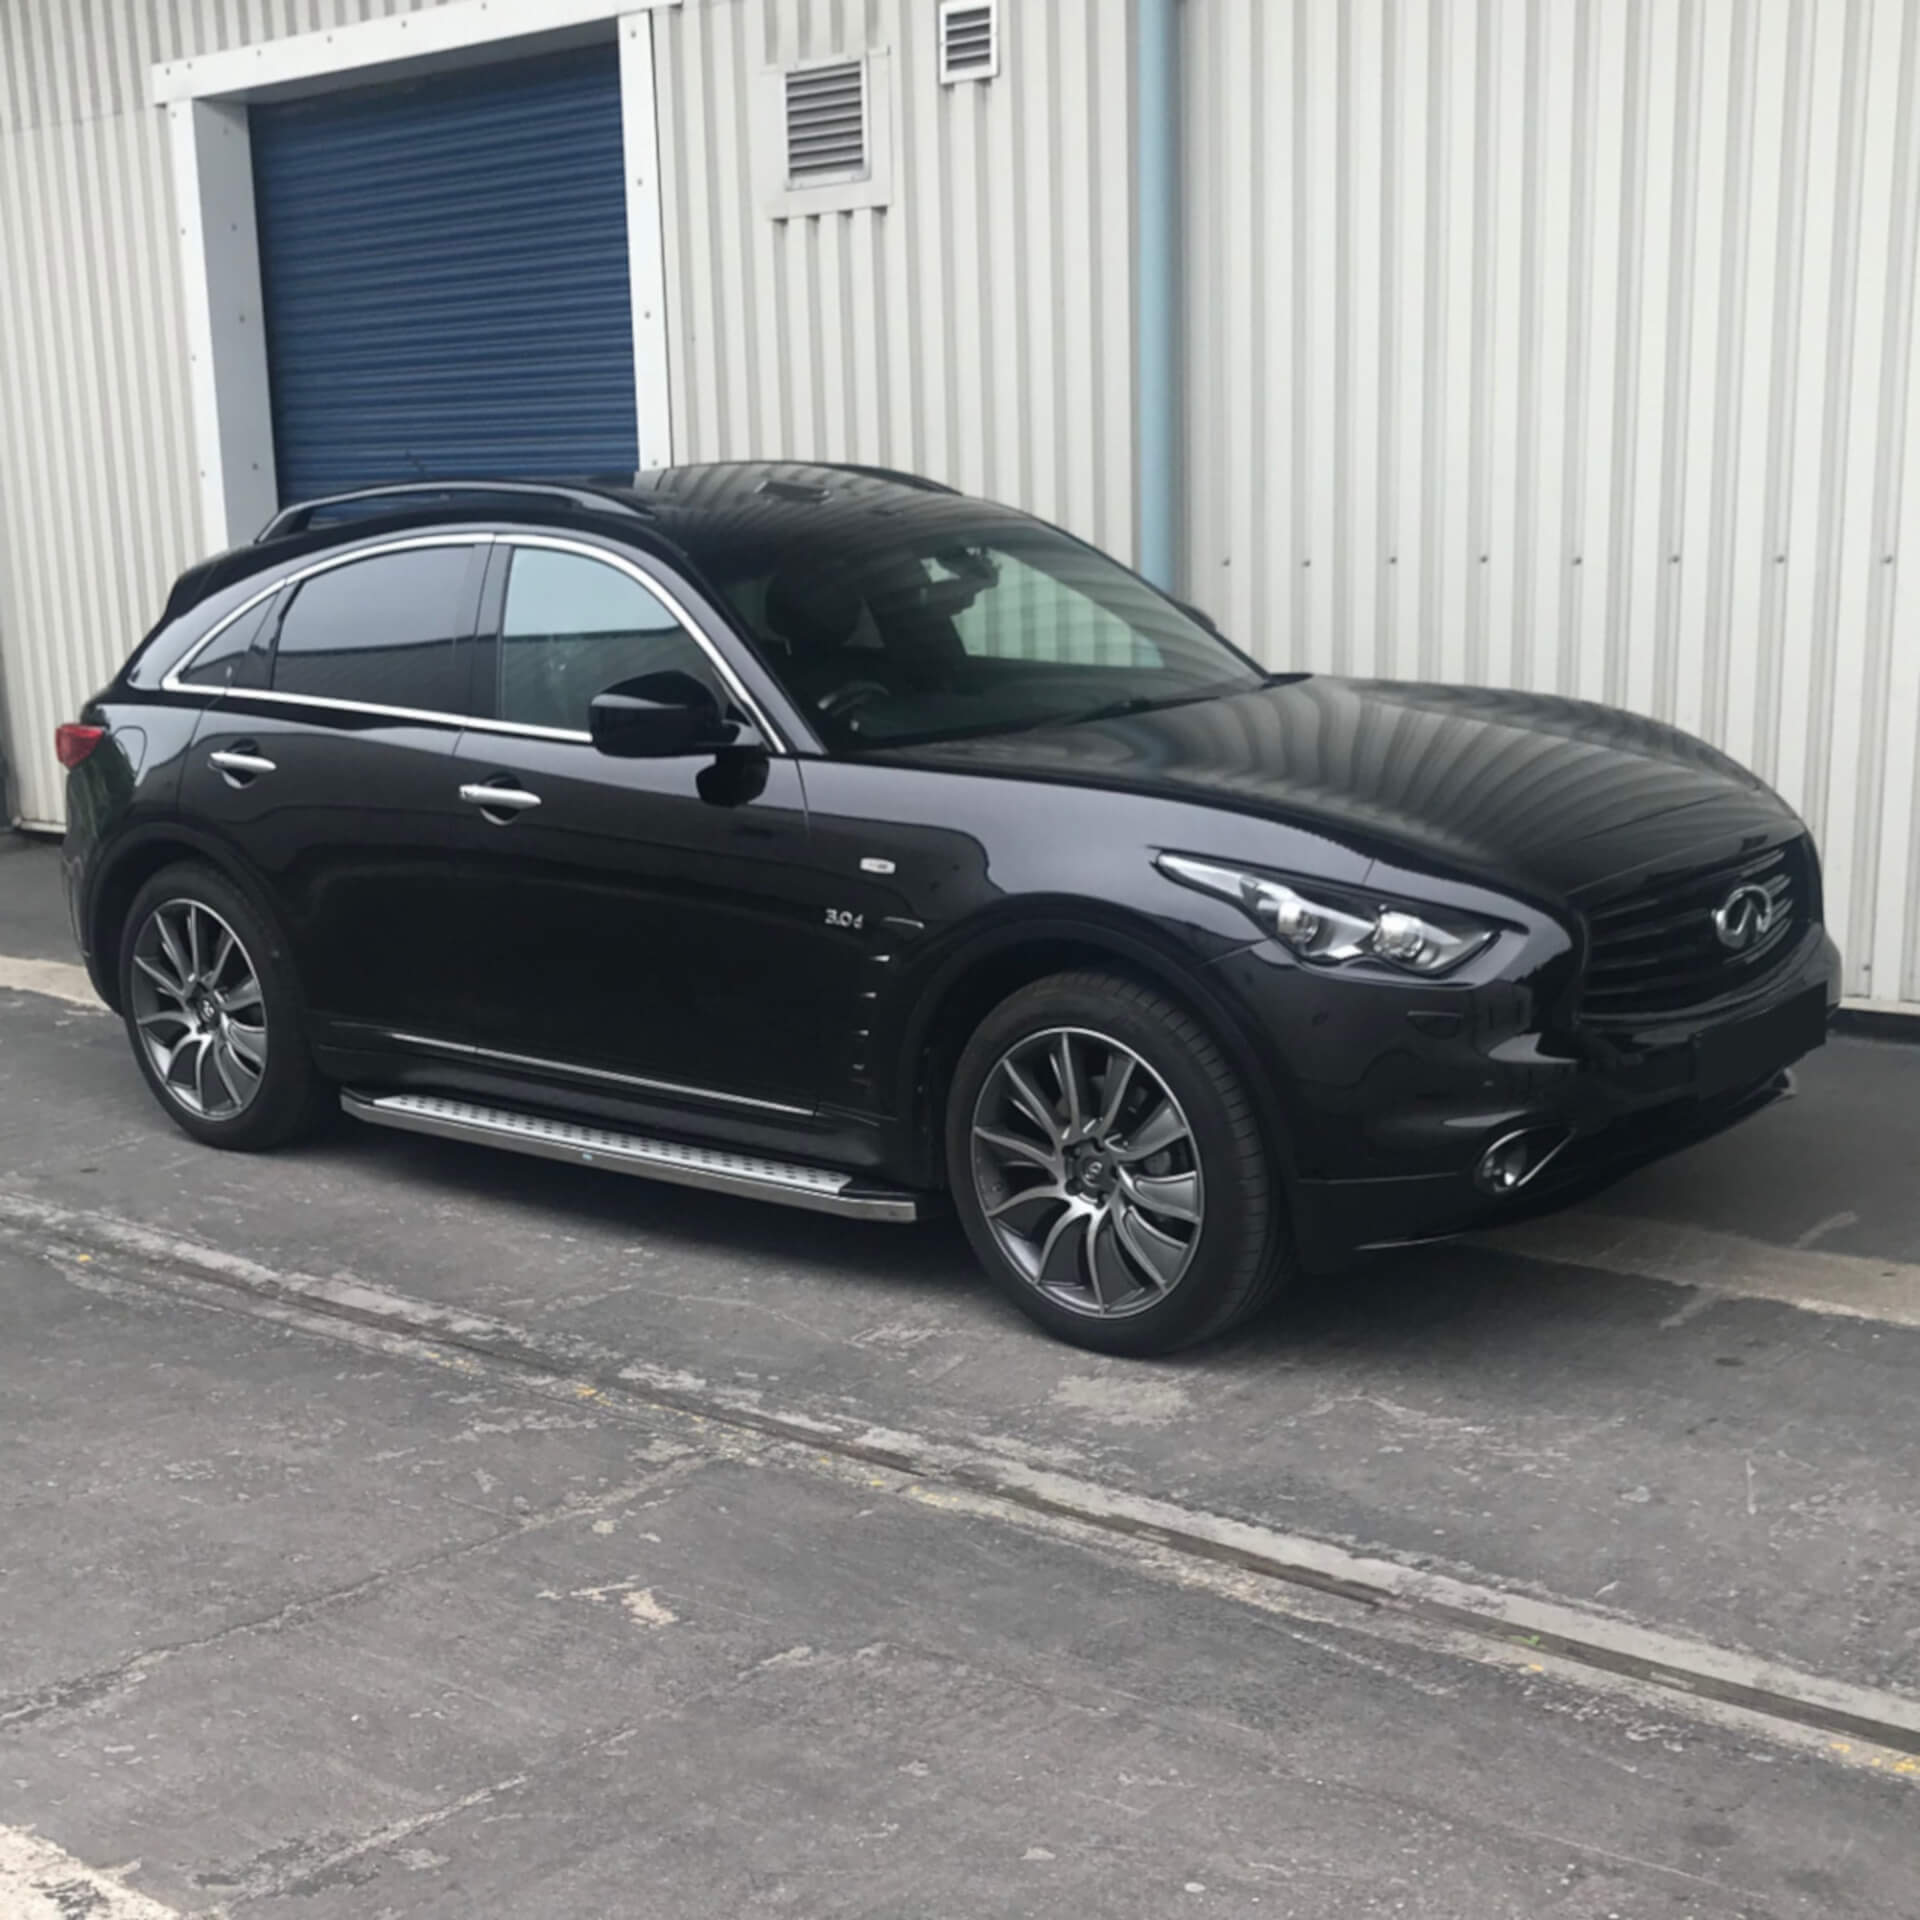 Direct4x4 accessories for Infiniti QX70 vehicles with a photo of a black Infiniti QX70 outside our offices fitted with our freedom side steps